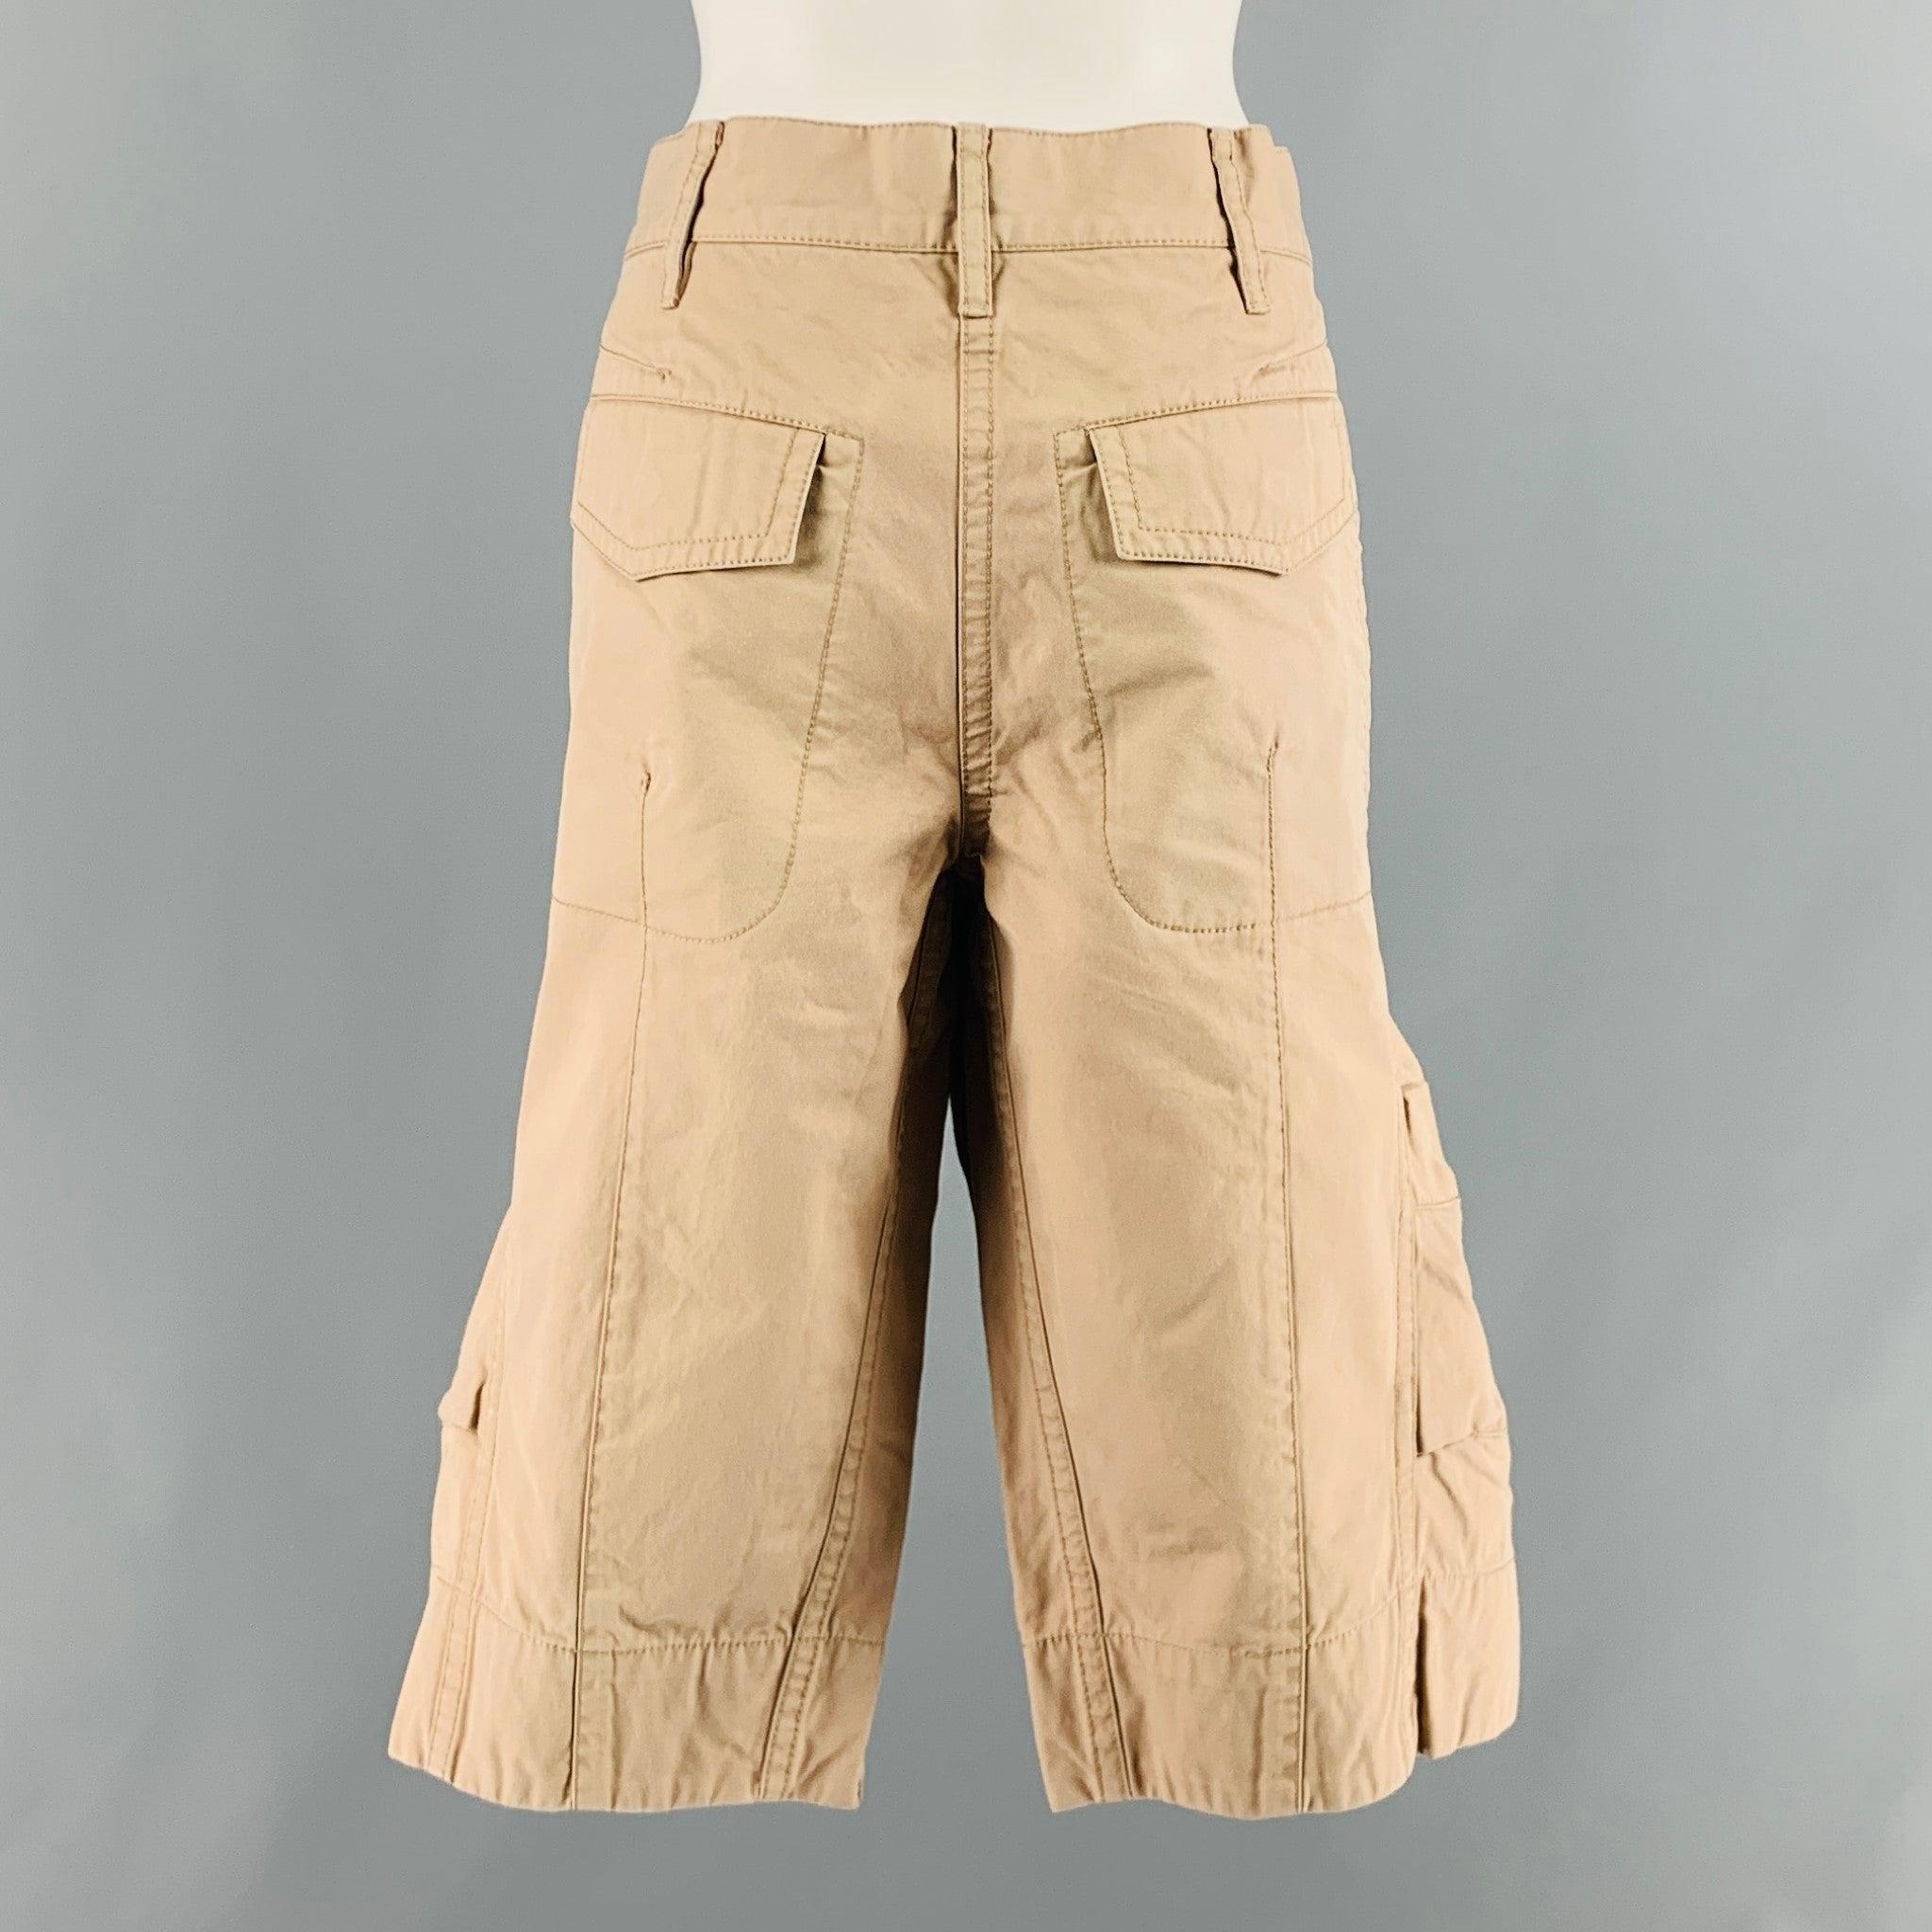 MARC JACOBS Size 10 Khaki Cotton Oversized Shorts In Excellent Condition For Sale In San Francisco, CA